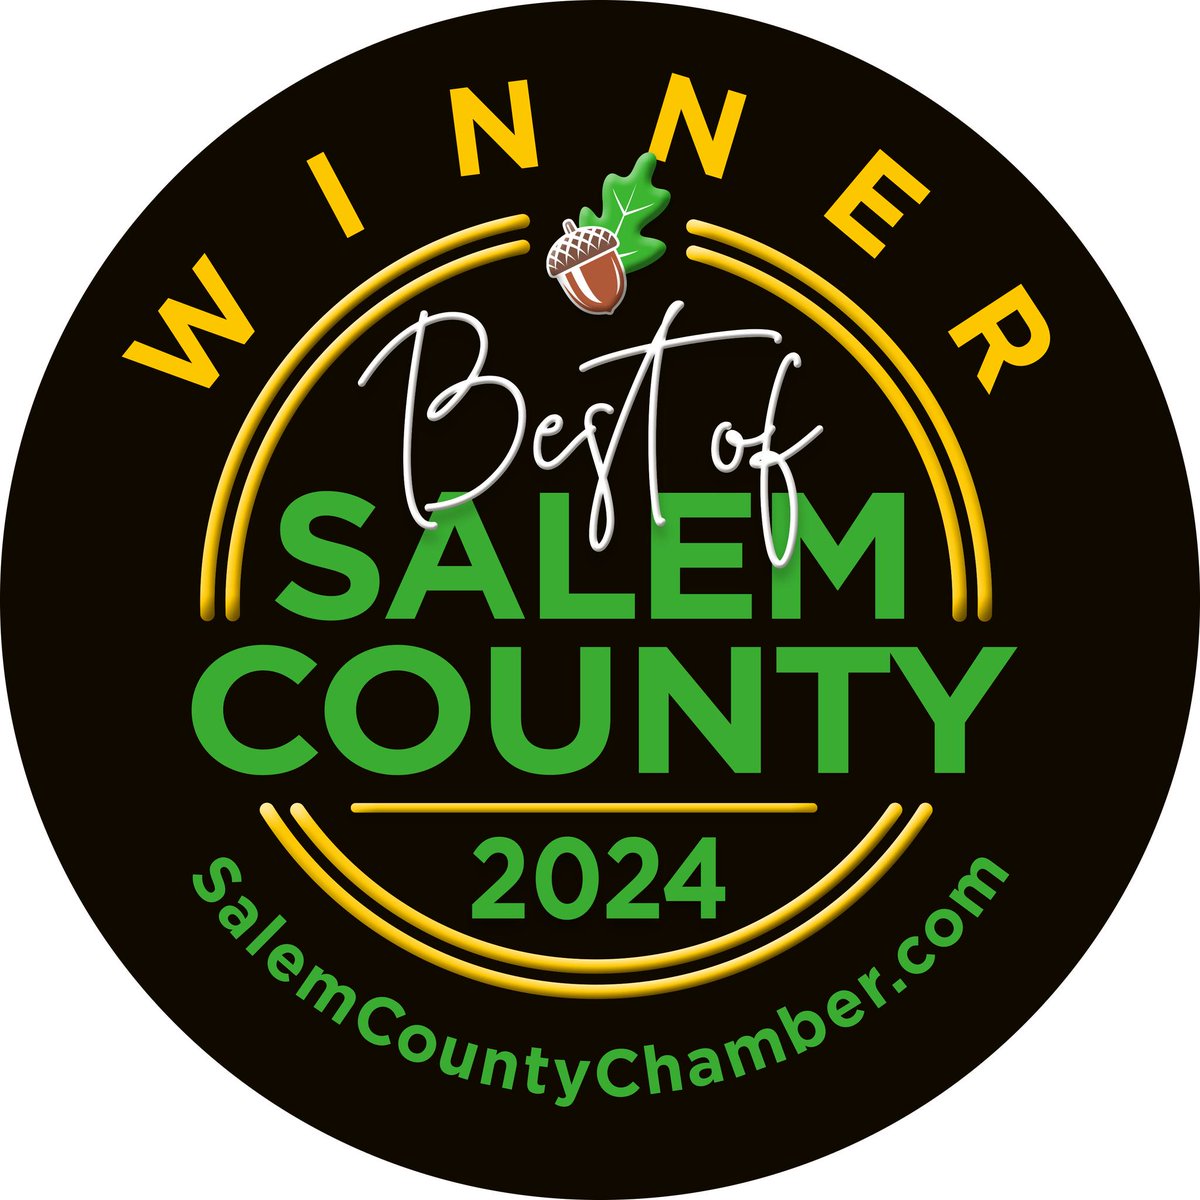 We are thrilled to share that we have been named the Best in Assisted Living & Senior Home Care for 2024 in Salem County! Thank you to all our residents, families, team members and supporters for helping us achieve this amazing honor. #AssistedLiving #SeniorHomeCare #senioriving